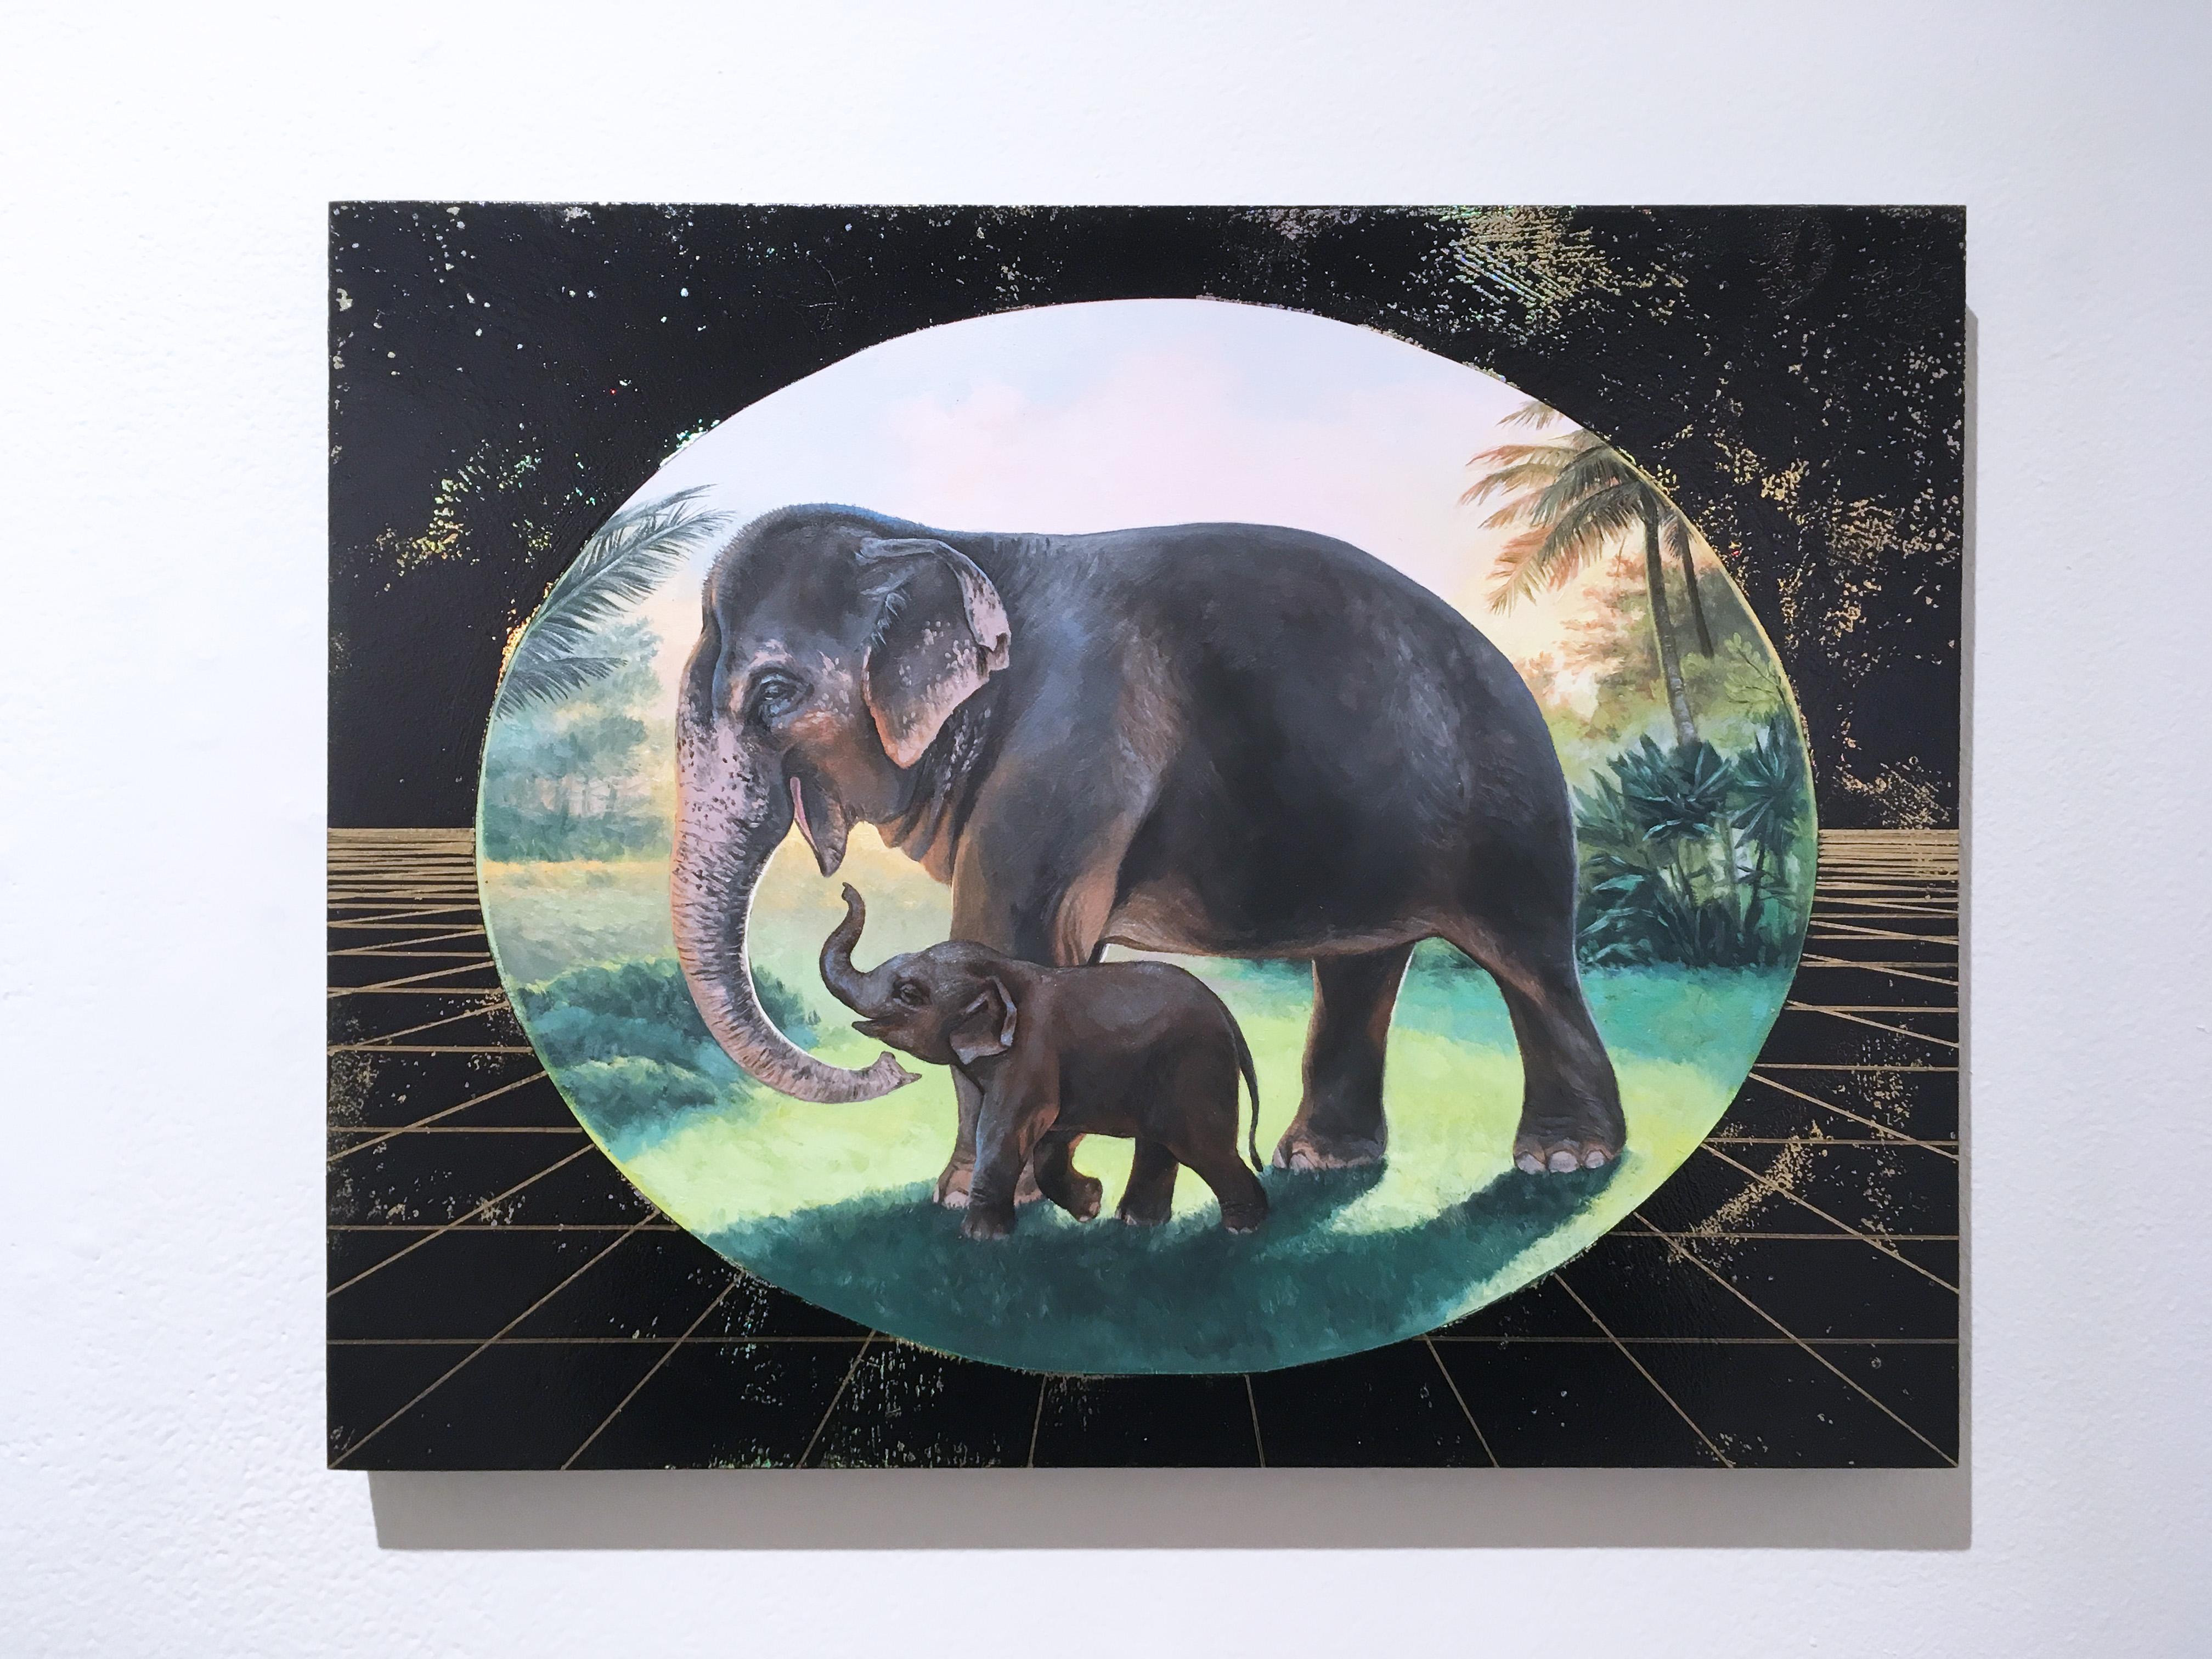 Gentle Mother, oil, metallic foil, green, trees, elephants, animals, landscape - Painting by Alexis Kandra